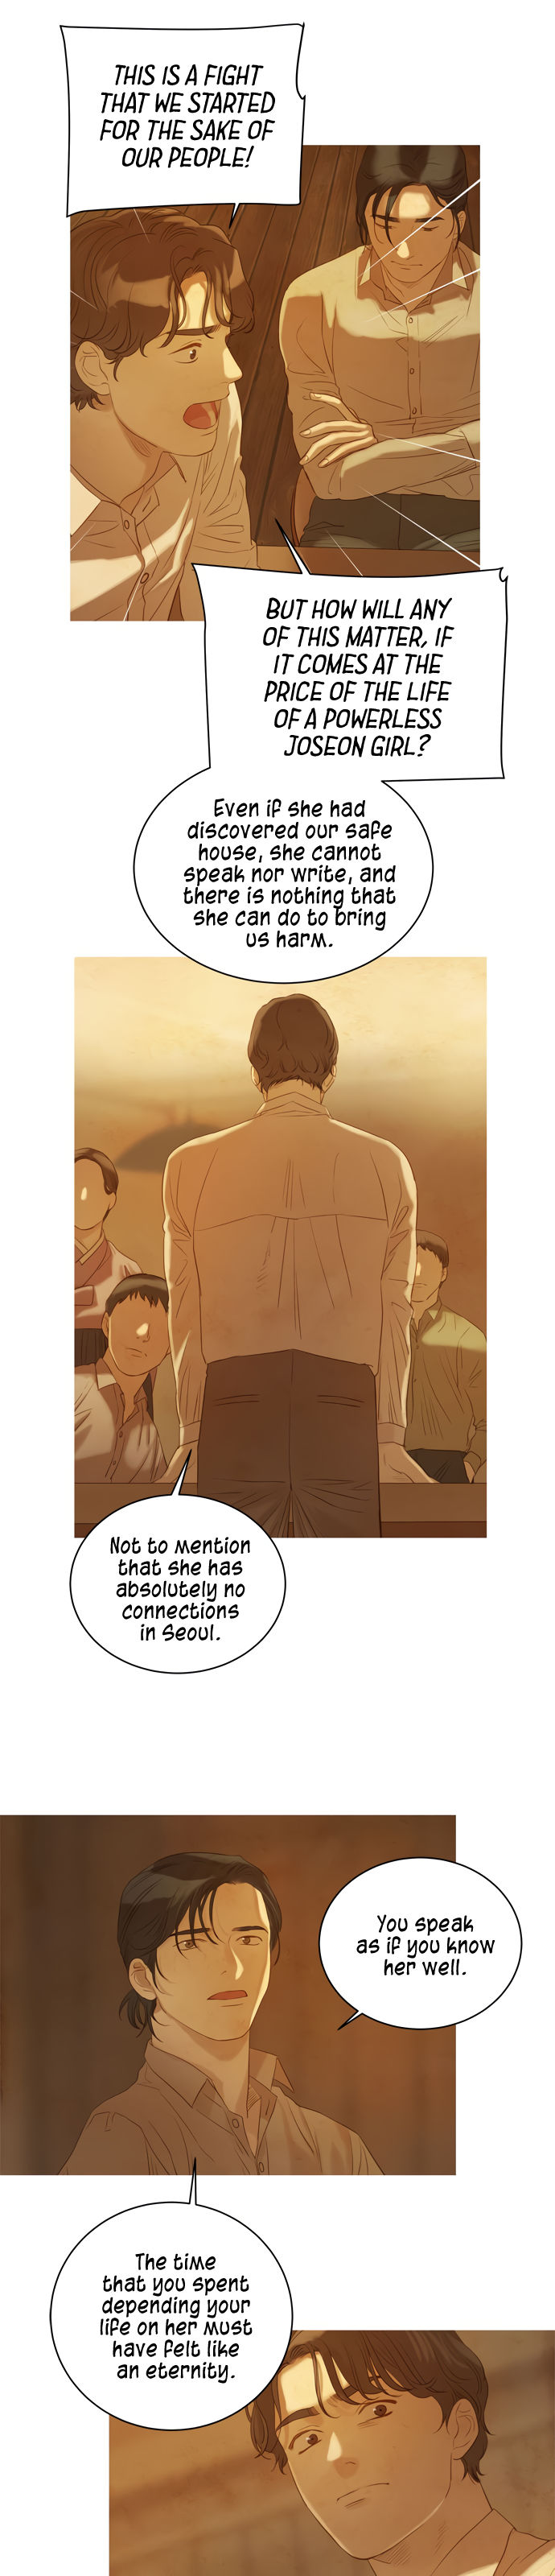 Gorae Byul - The Gyeongseong Mermaid - Chapter 19 Page 17